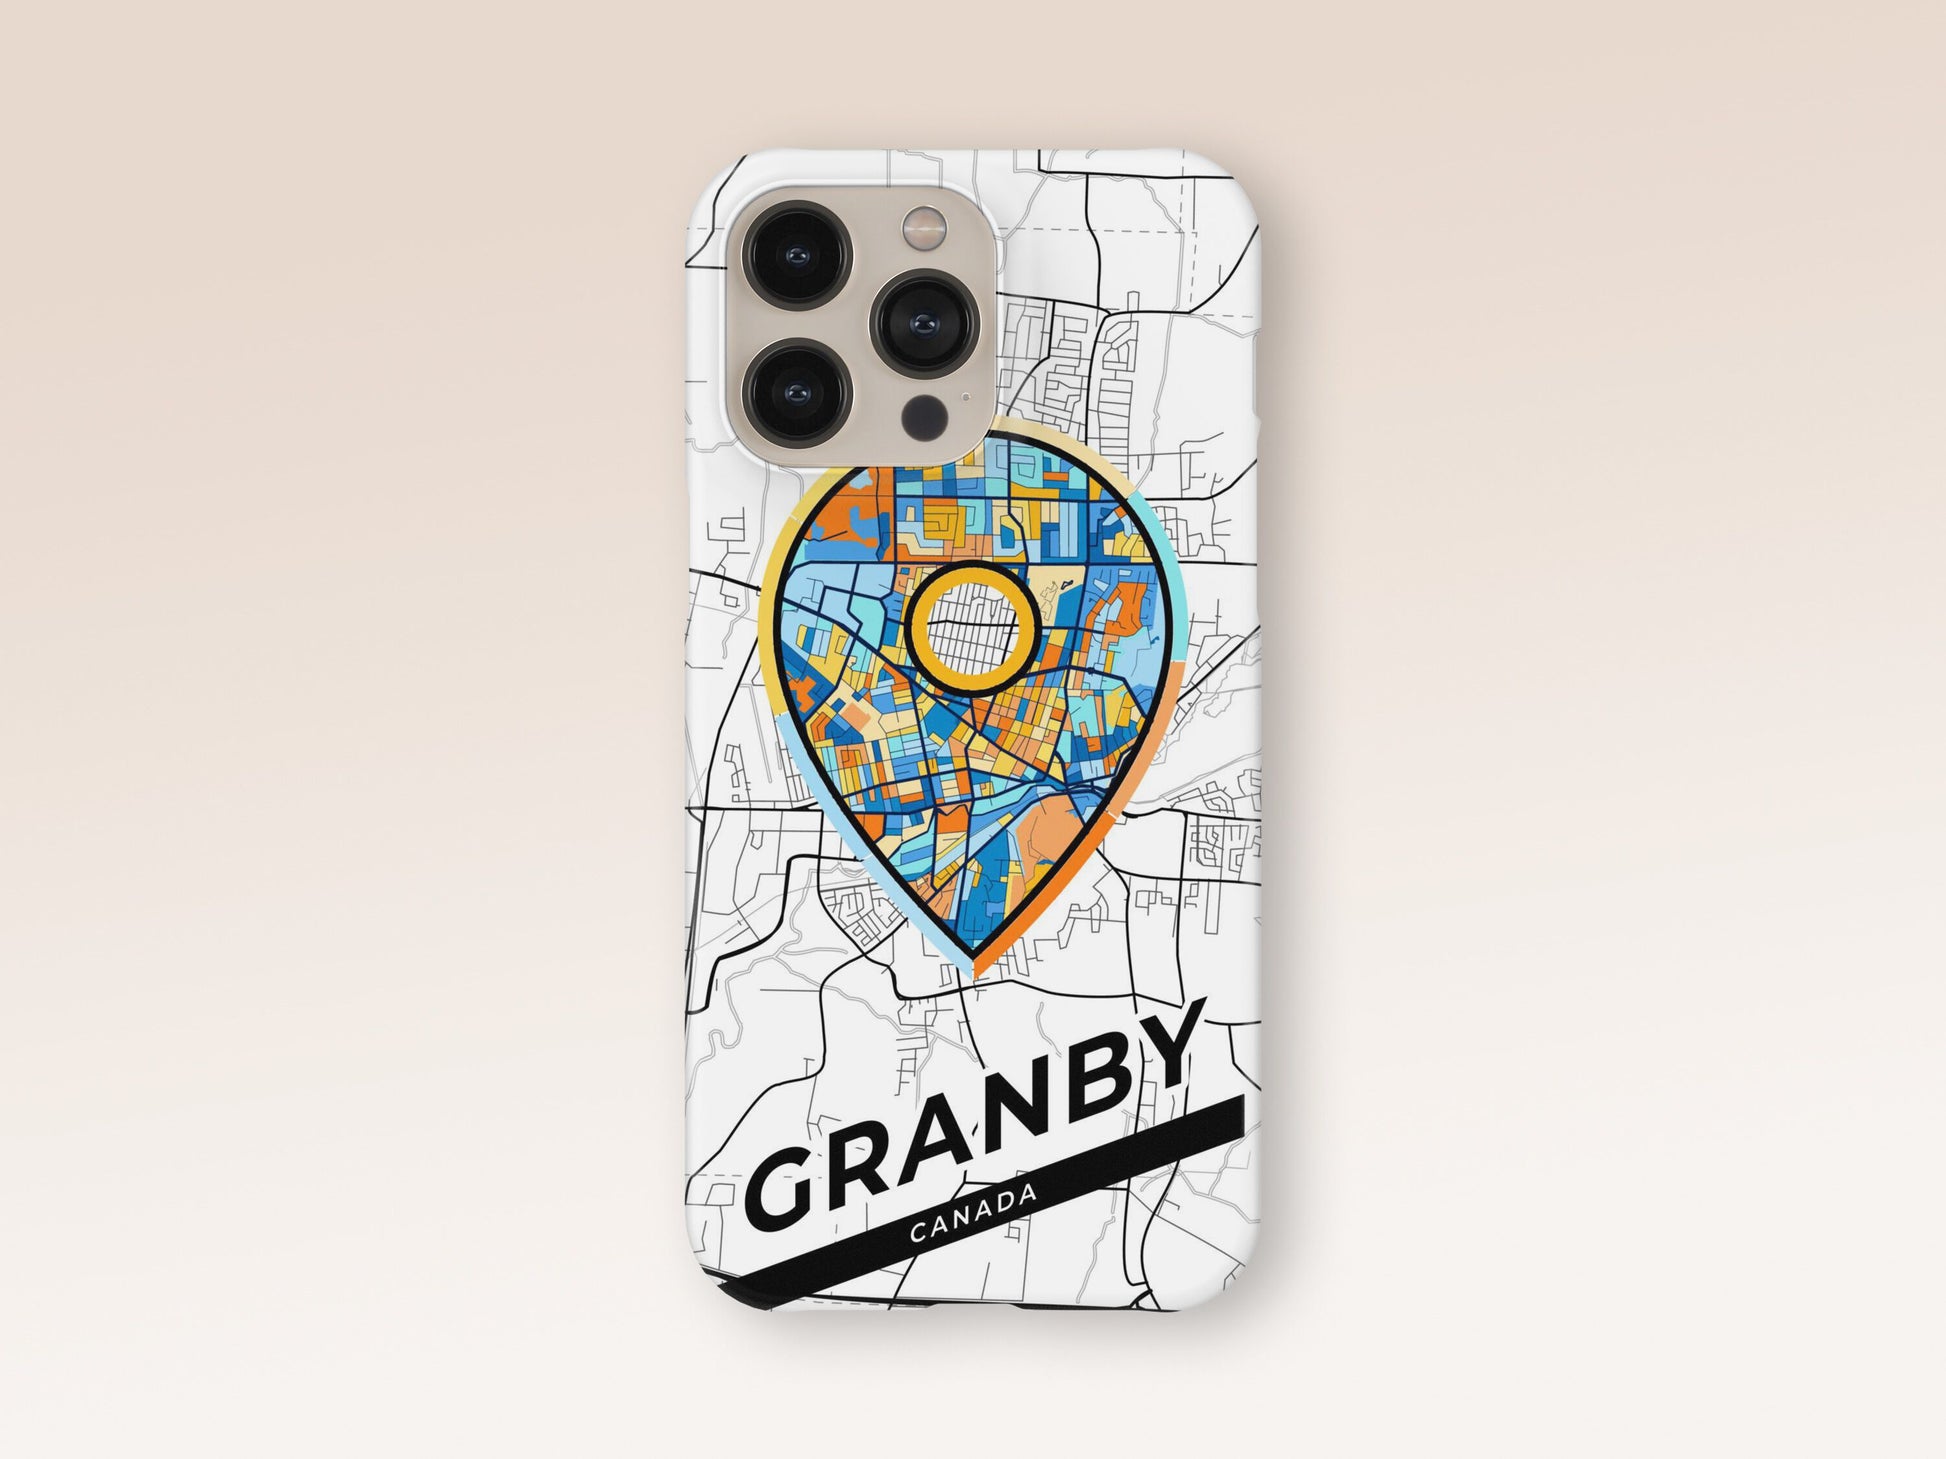 Granby Canada slim phone case with colorful icon. Birthday, wedding or housewarming gift. Couple match cases. 1